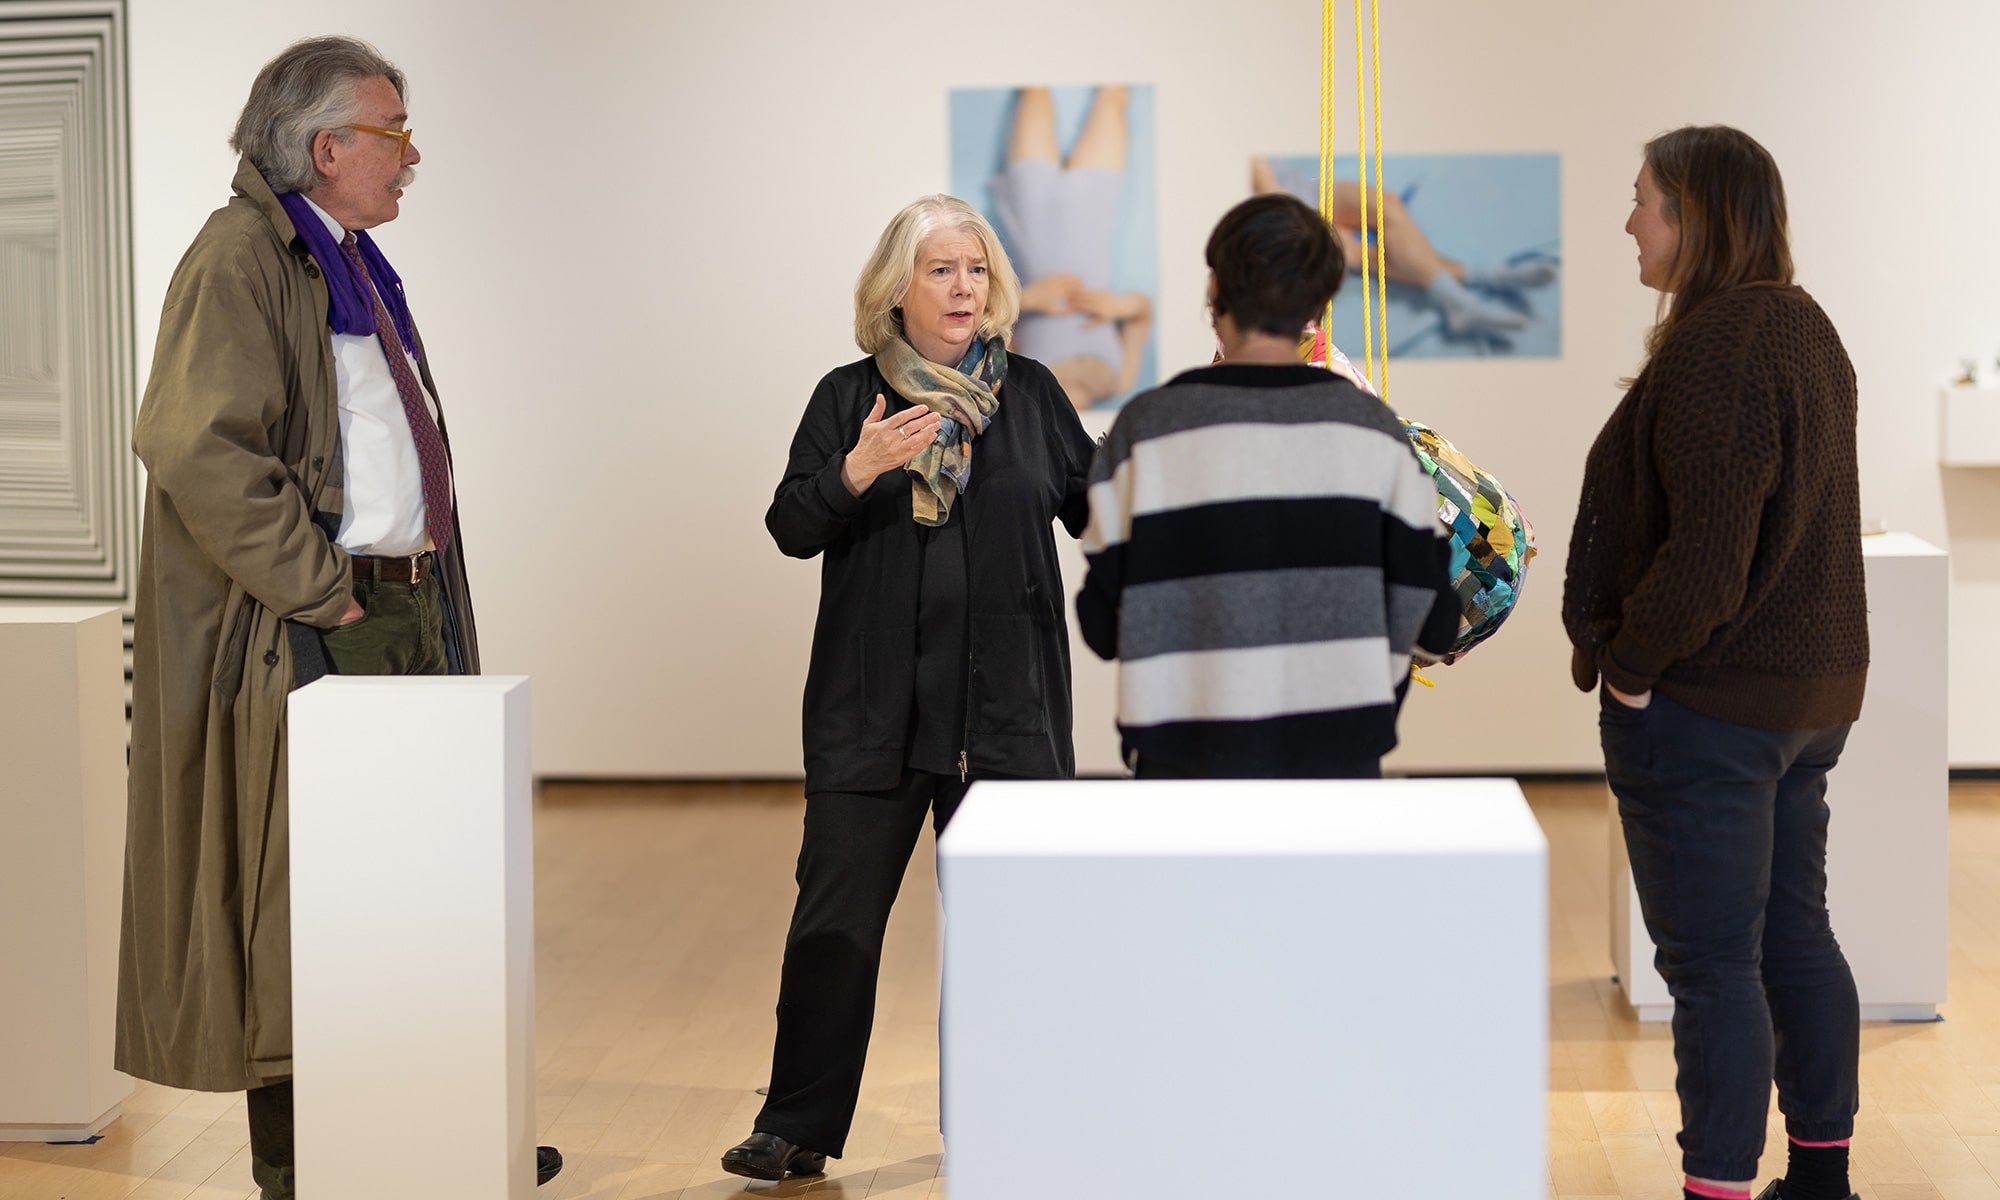 Nannette V. Maciejunes ’75 with people in gallery